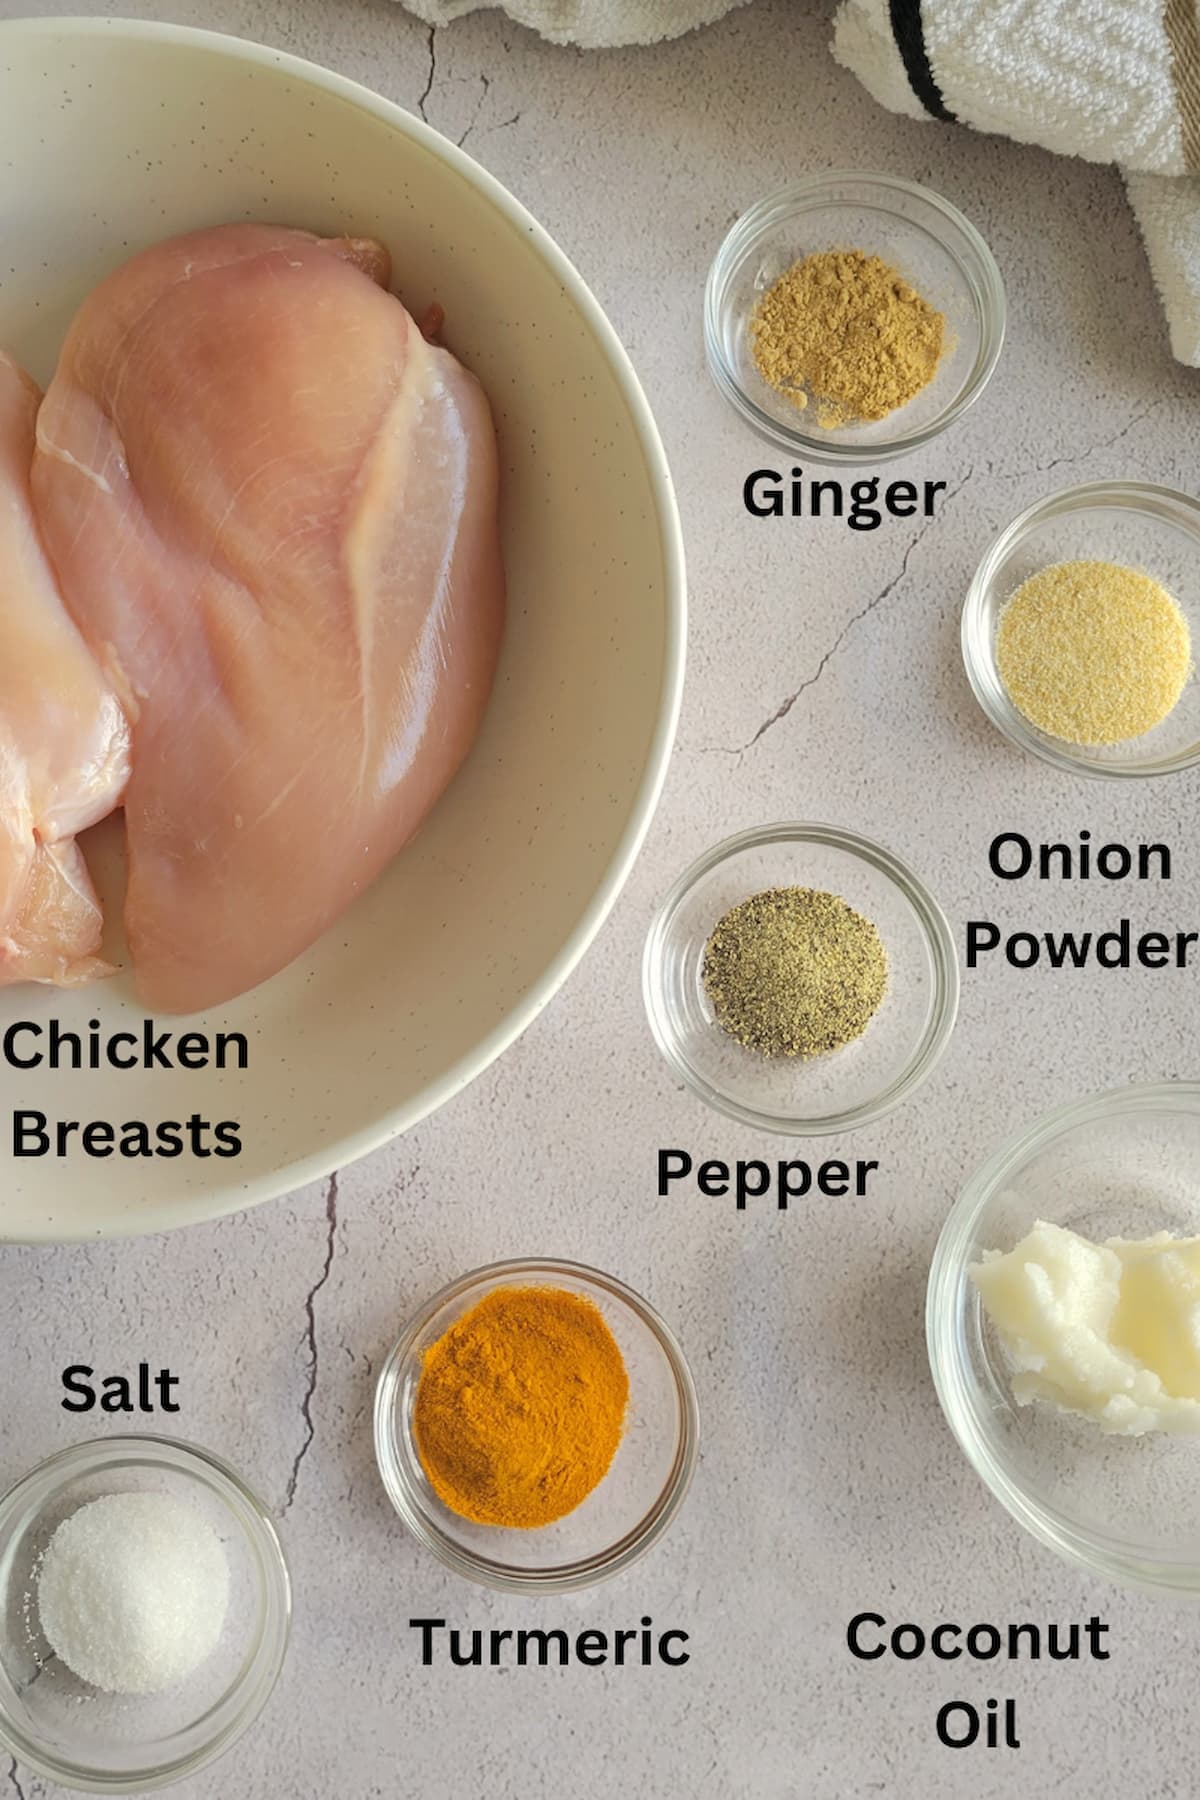 ingredients for recipe for turmeric chicken - chicken breasts, turmeric, pepper, salt, onion powder, ginger, coconut oil